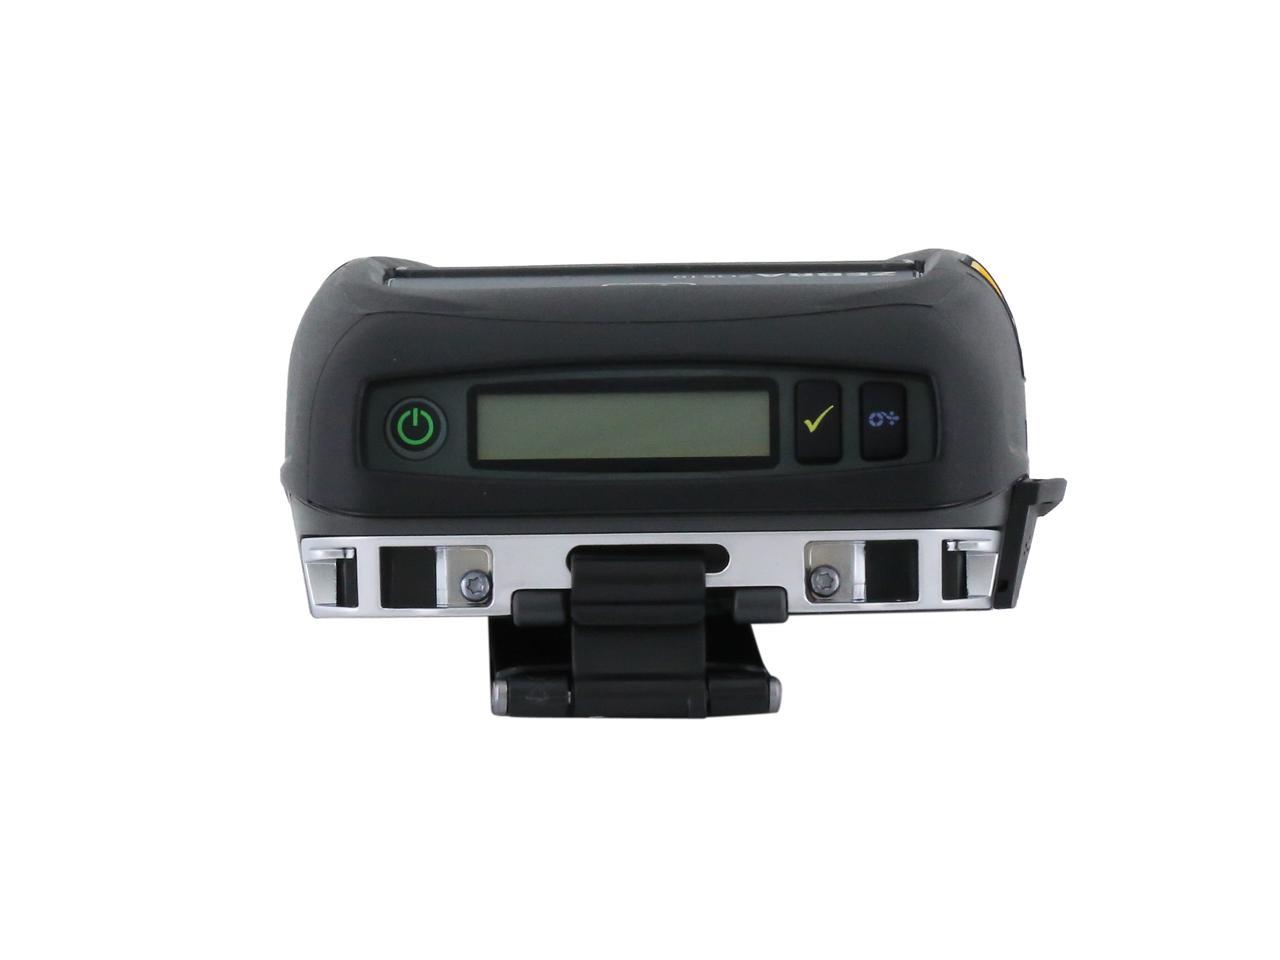 Zebra Zq510 3 Mobile Direct Thermal Receipt And Label Printer 203 Dpi Bluetooth 40 Linered 5711